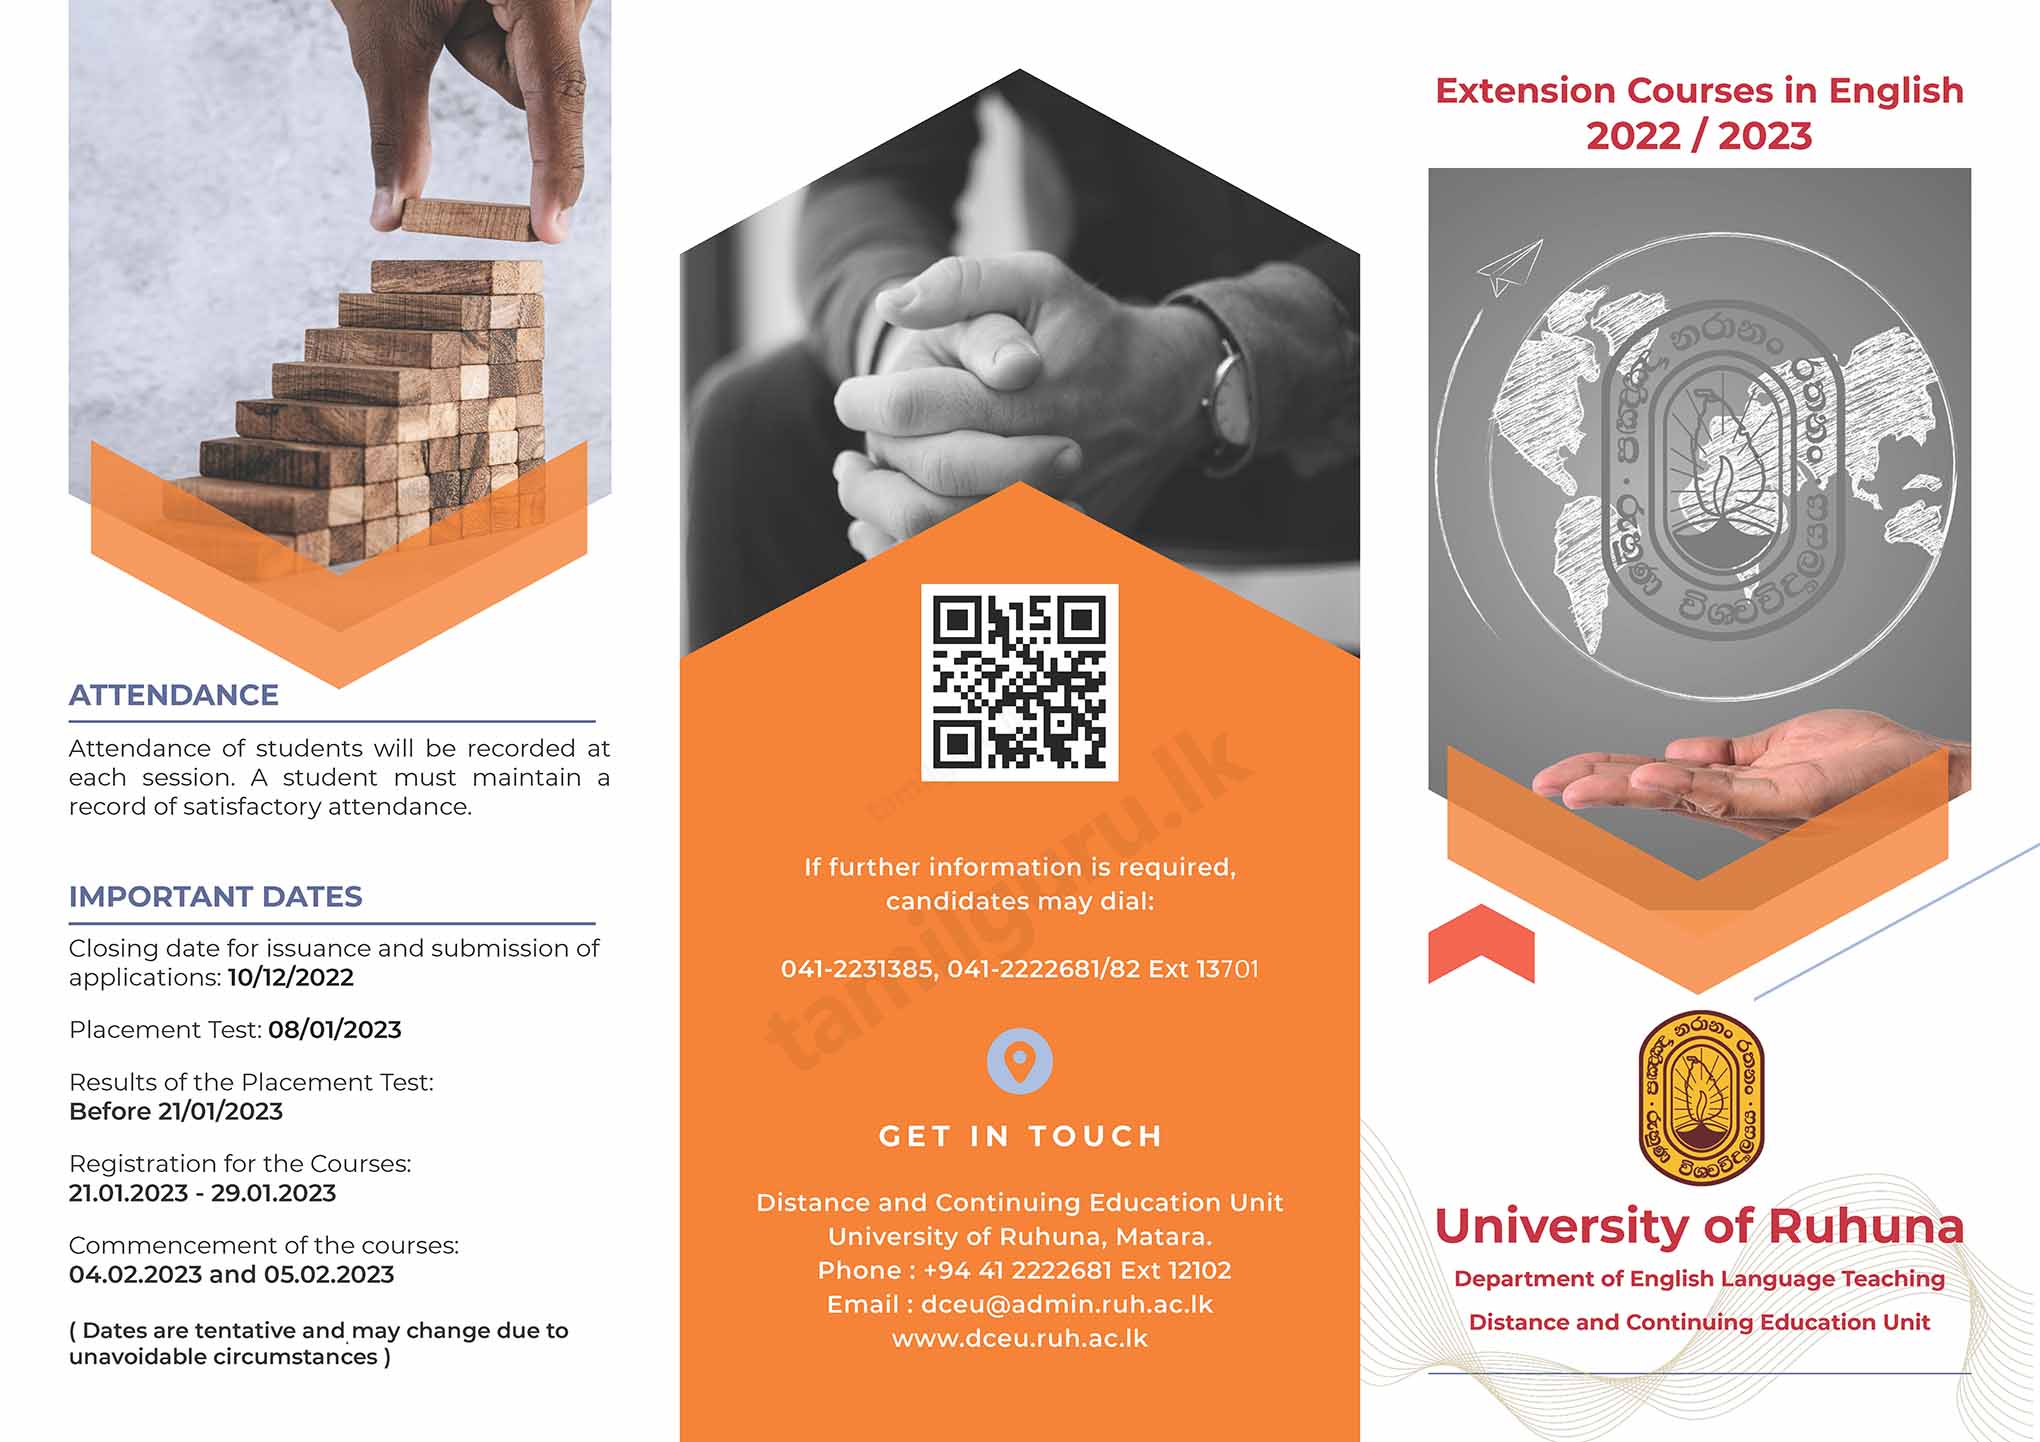 Calling Applications for Extension Courses in English (Diploma & Certificates) 2022 - University of Ruhuna